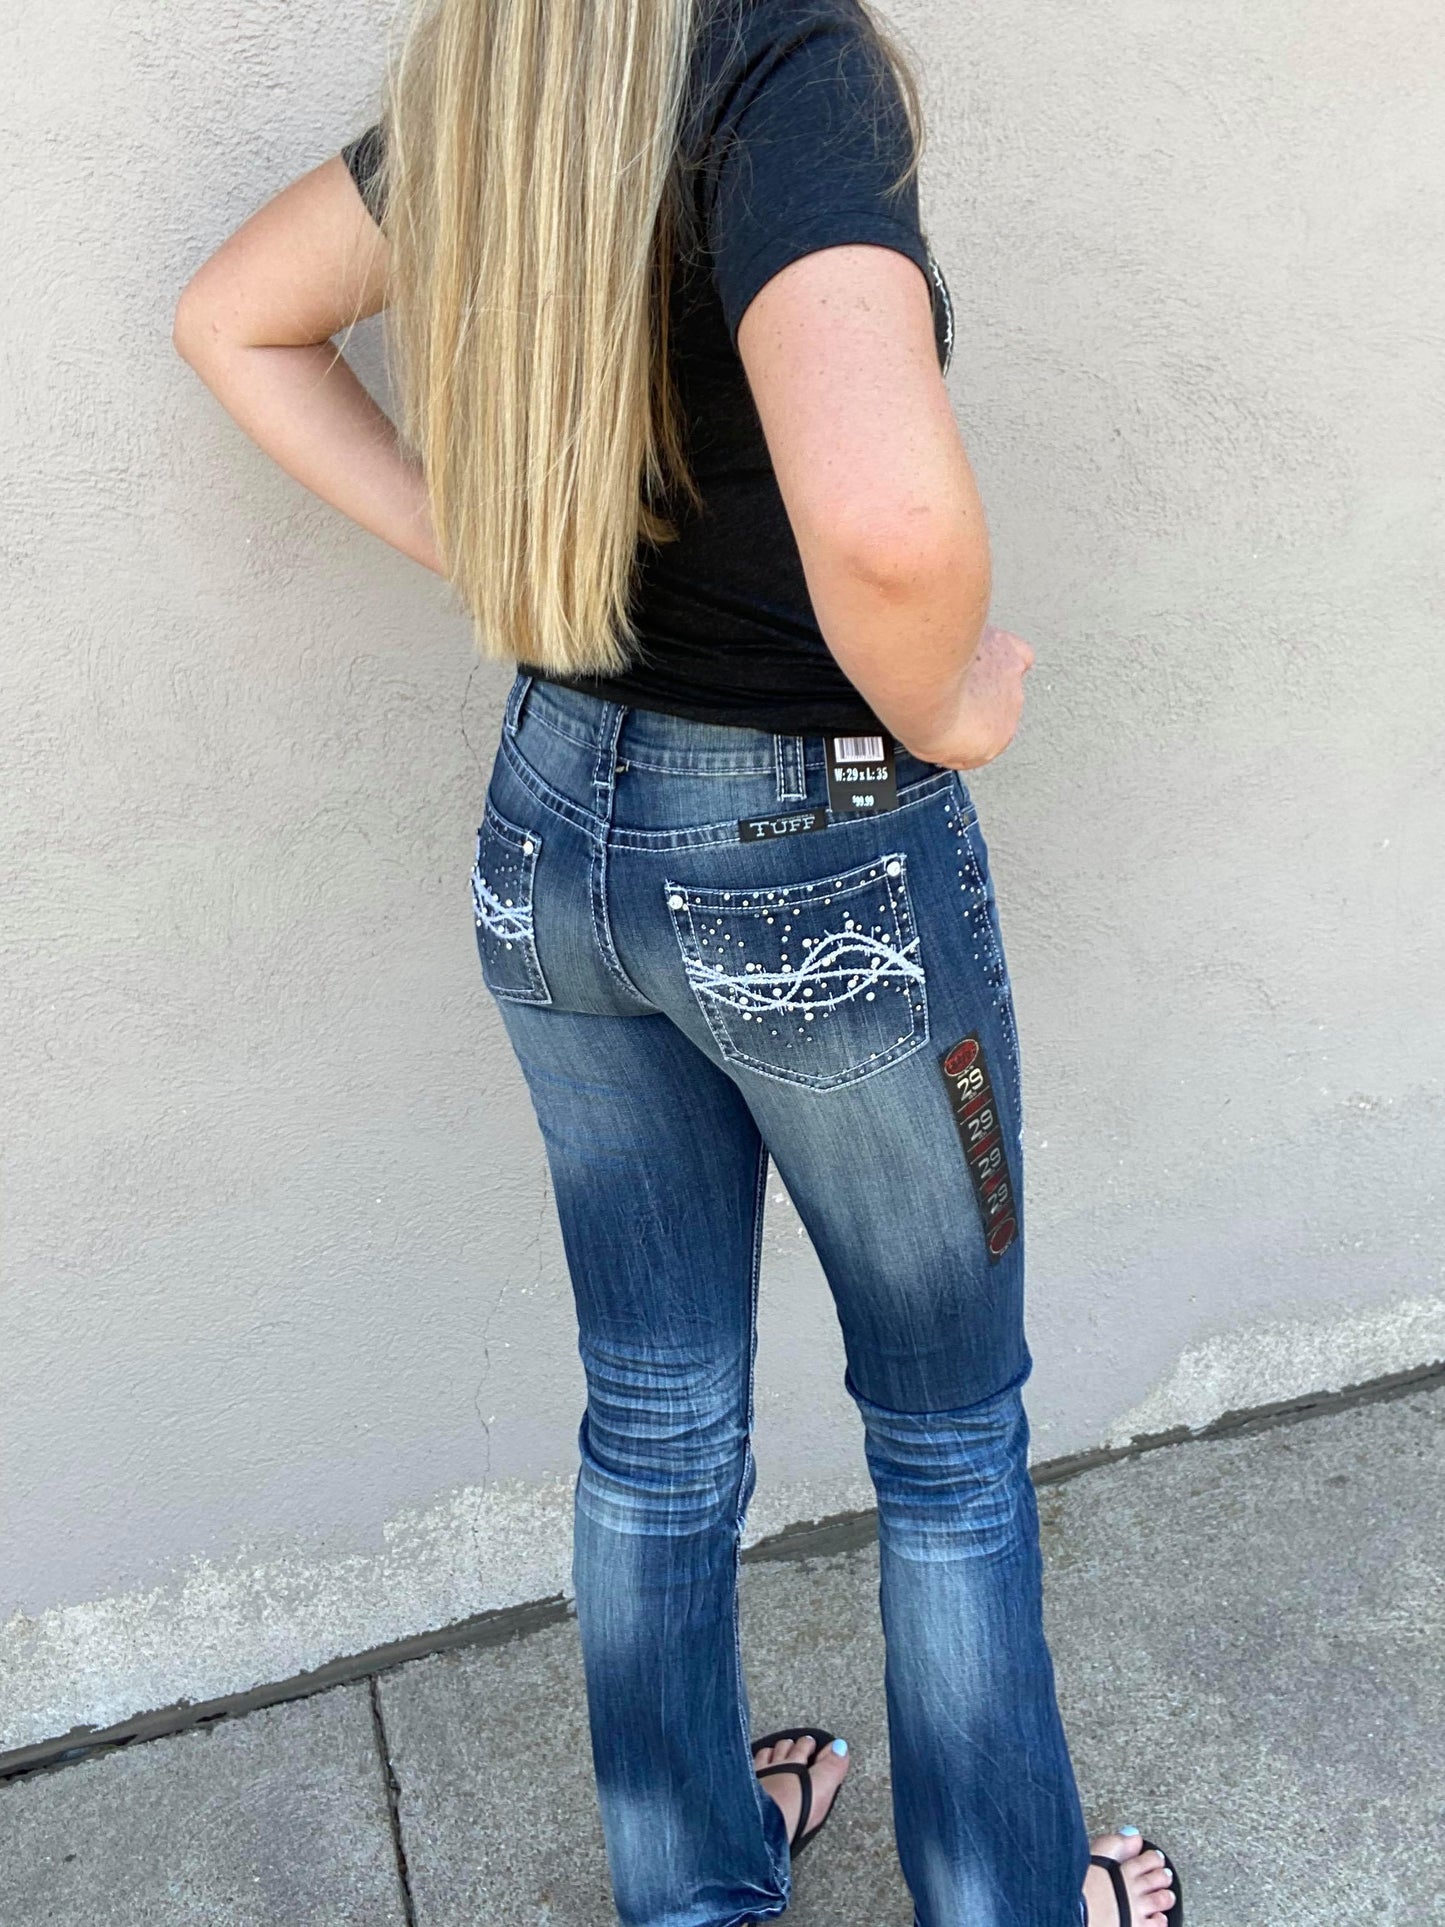 Downtown Cowgirl Tuff Jeans